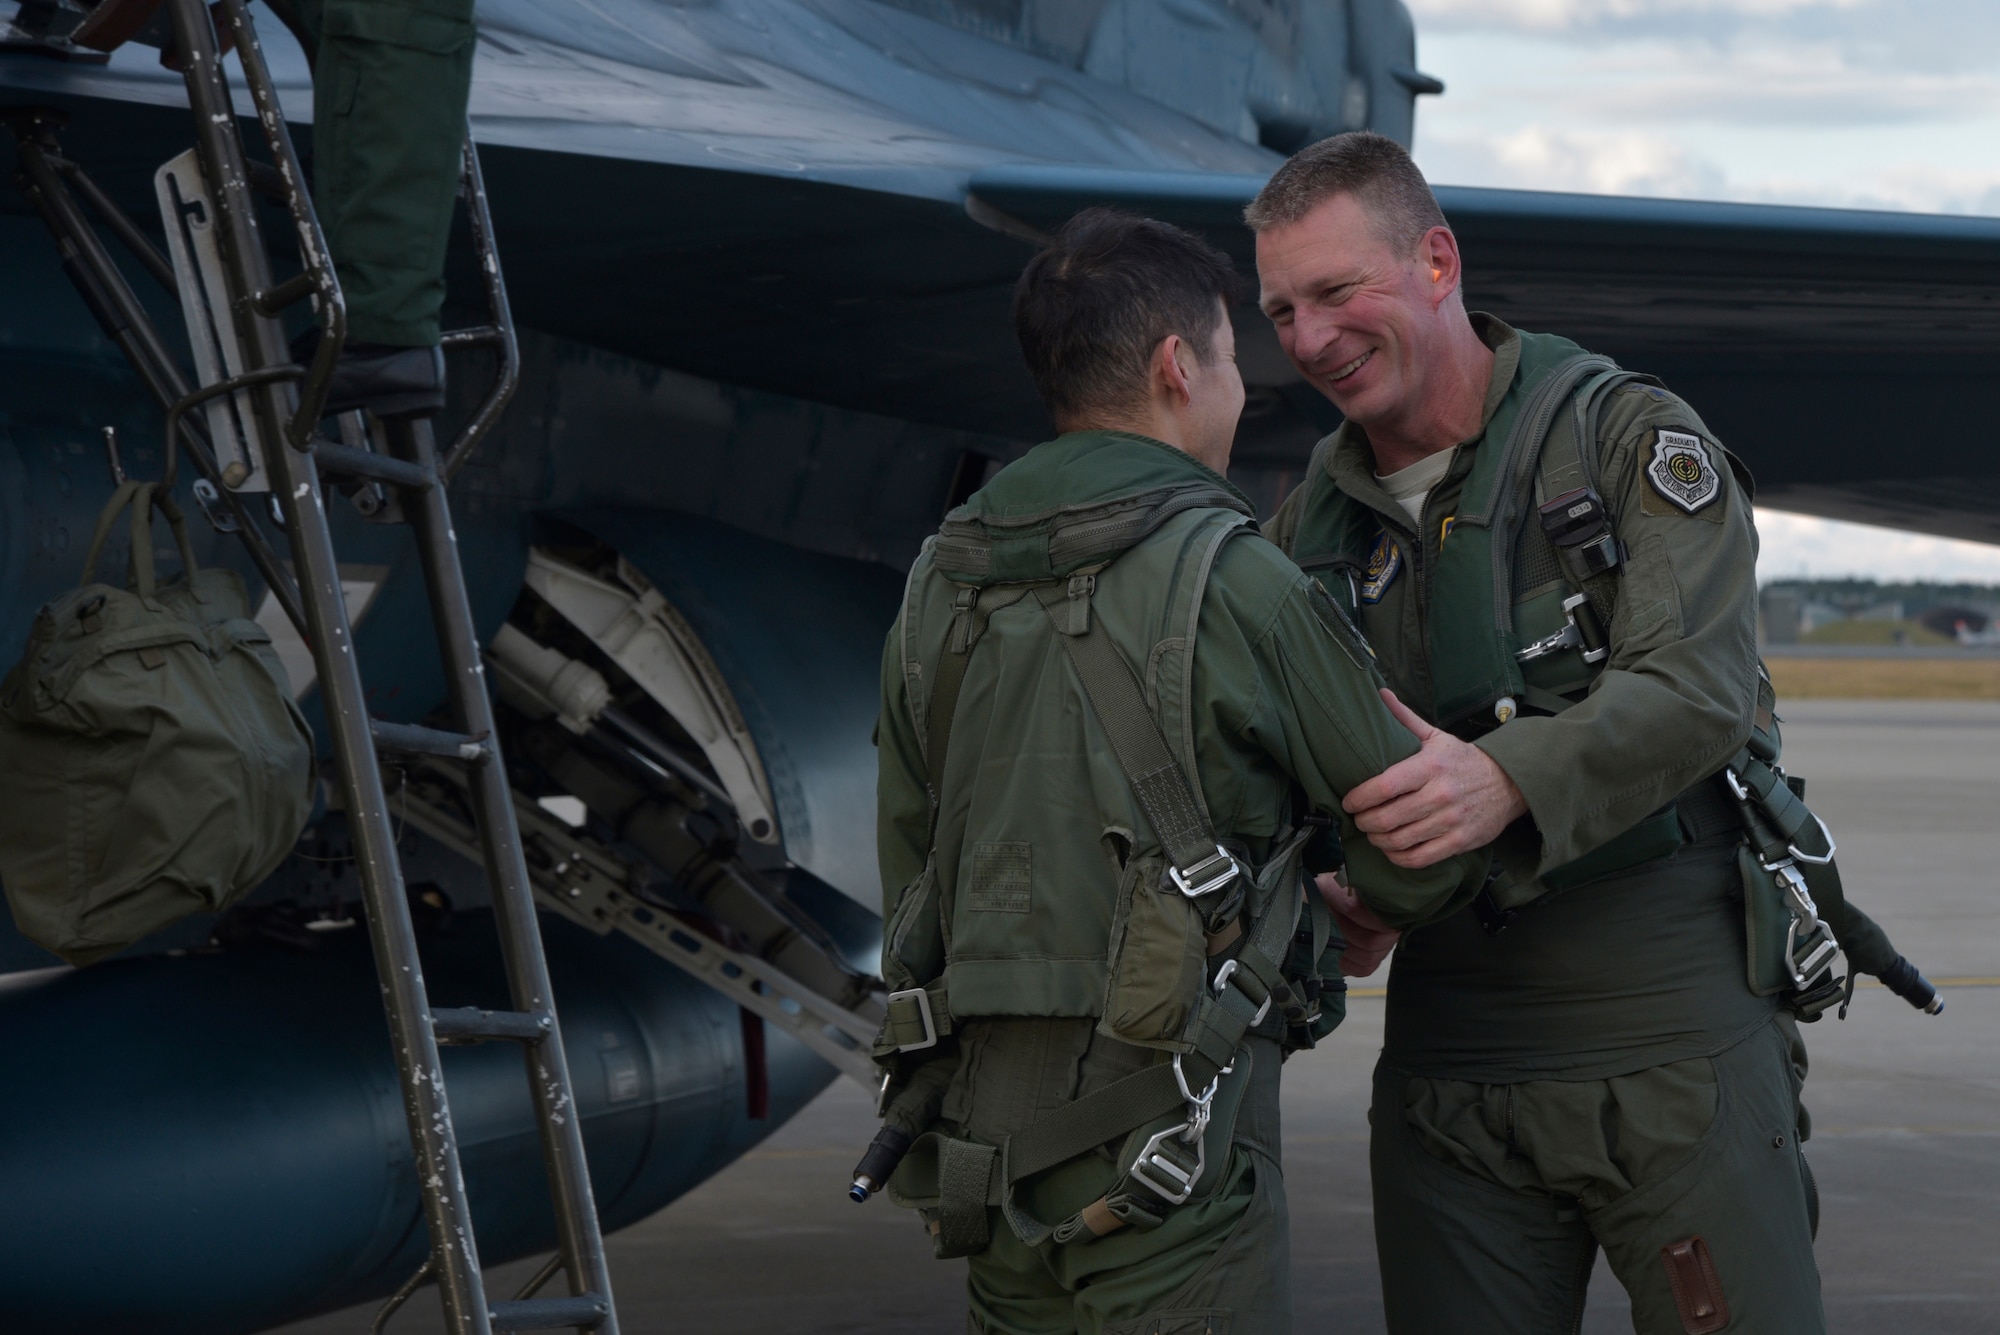 Lt. Gen. John Dolan, the U.S. Forces Japan commander, thanks the Japan Air Self-Defense Force pilot that accompanied him on his flight in a Mitsubishi F-2 at Misawa Air Base, Japan, Oct. 14, 2015. Dolan also thanked the JASDF’s 3rd Air Wing leadership for their continued friendship and contributions to the alliance between the U.S. and Japan. (U.S. Air Force photo/Senior Airman Jose L. Hernandez-Domitilo)